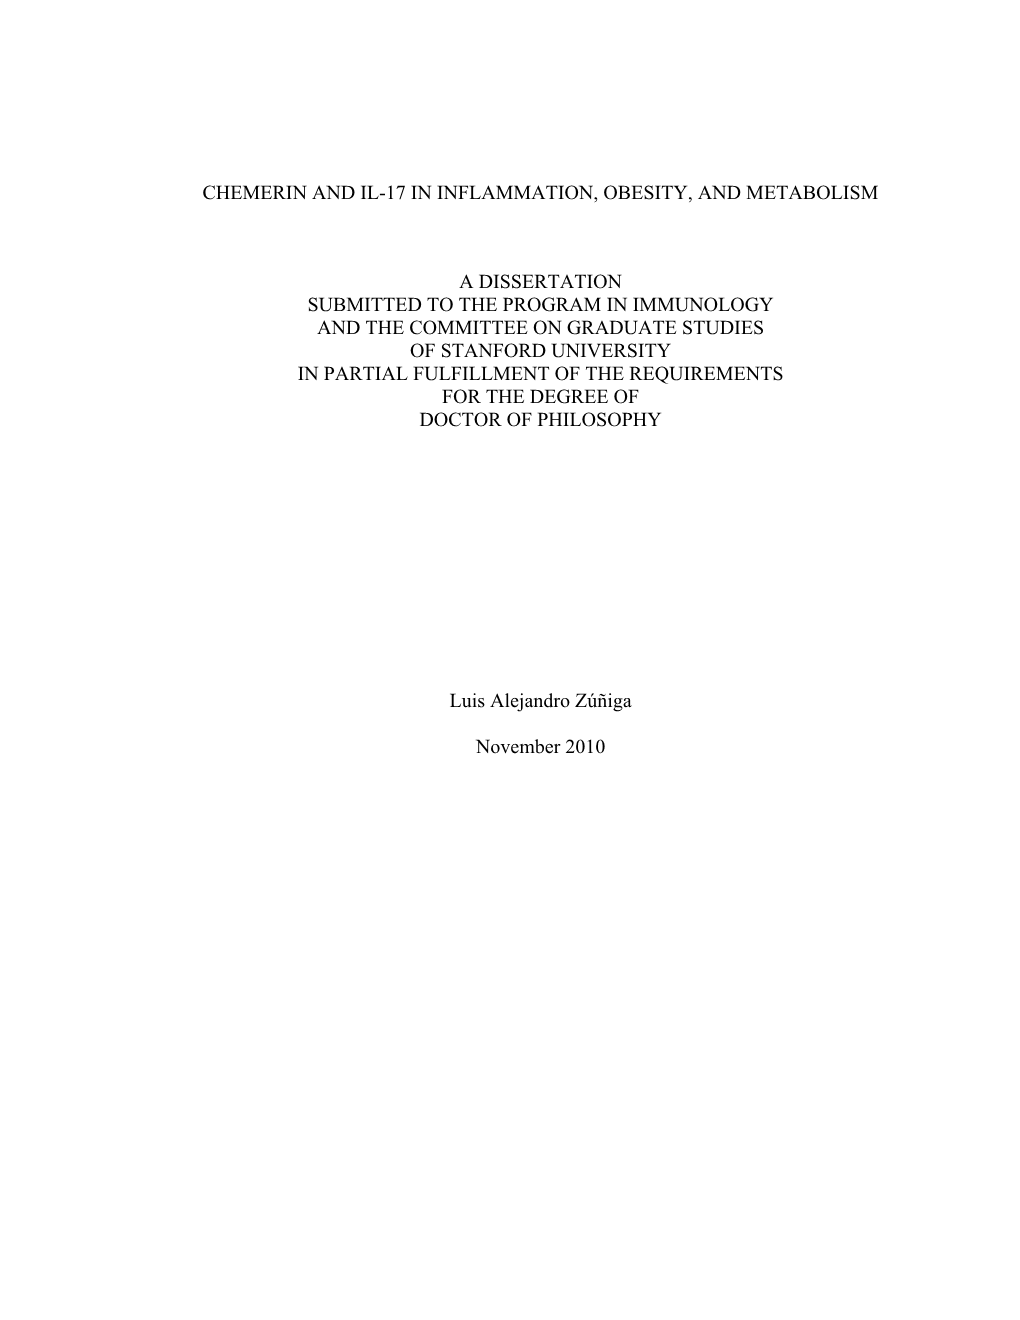 Chemerin and Il-17 in Inflammation, Obesity, and Metabolism a Dissertation Submitted to the Program in Immunology and the Commit